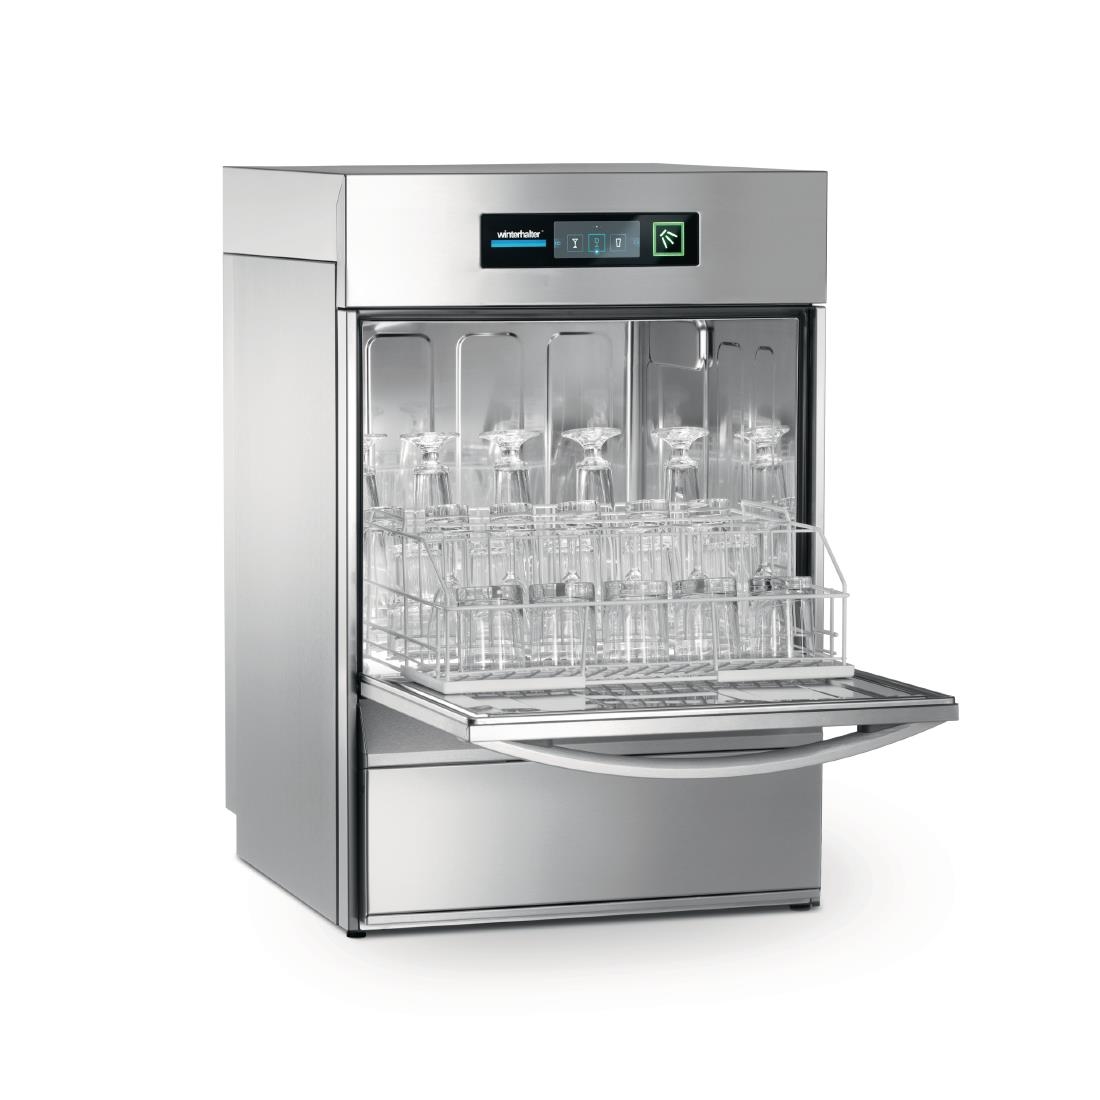 Winterhalter Undercounter Glasswasher UC-L Energy with Install